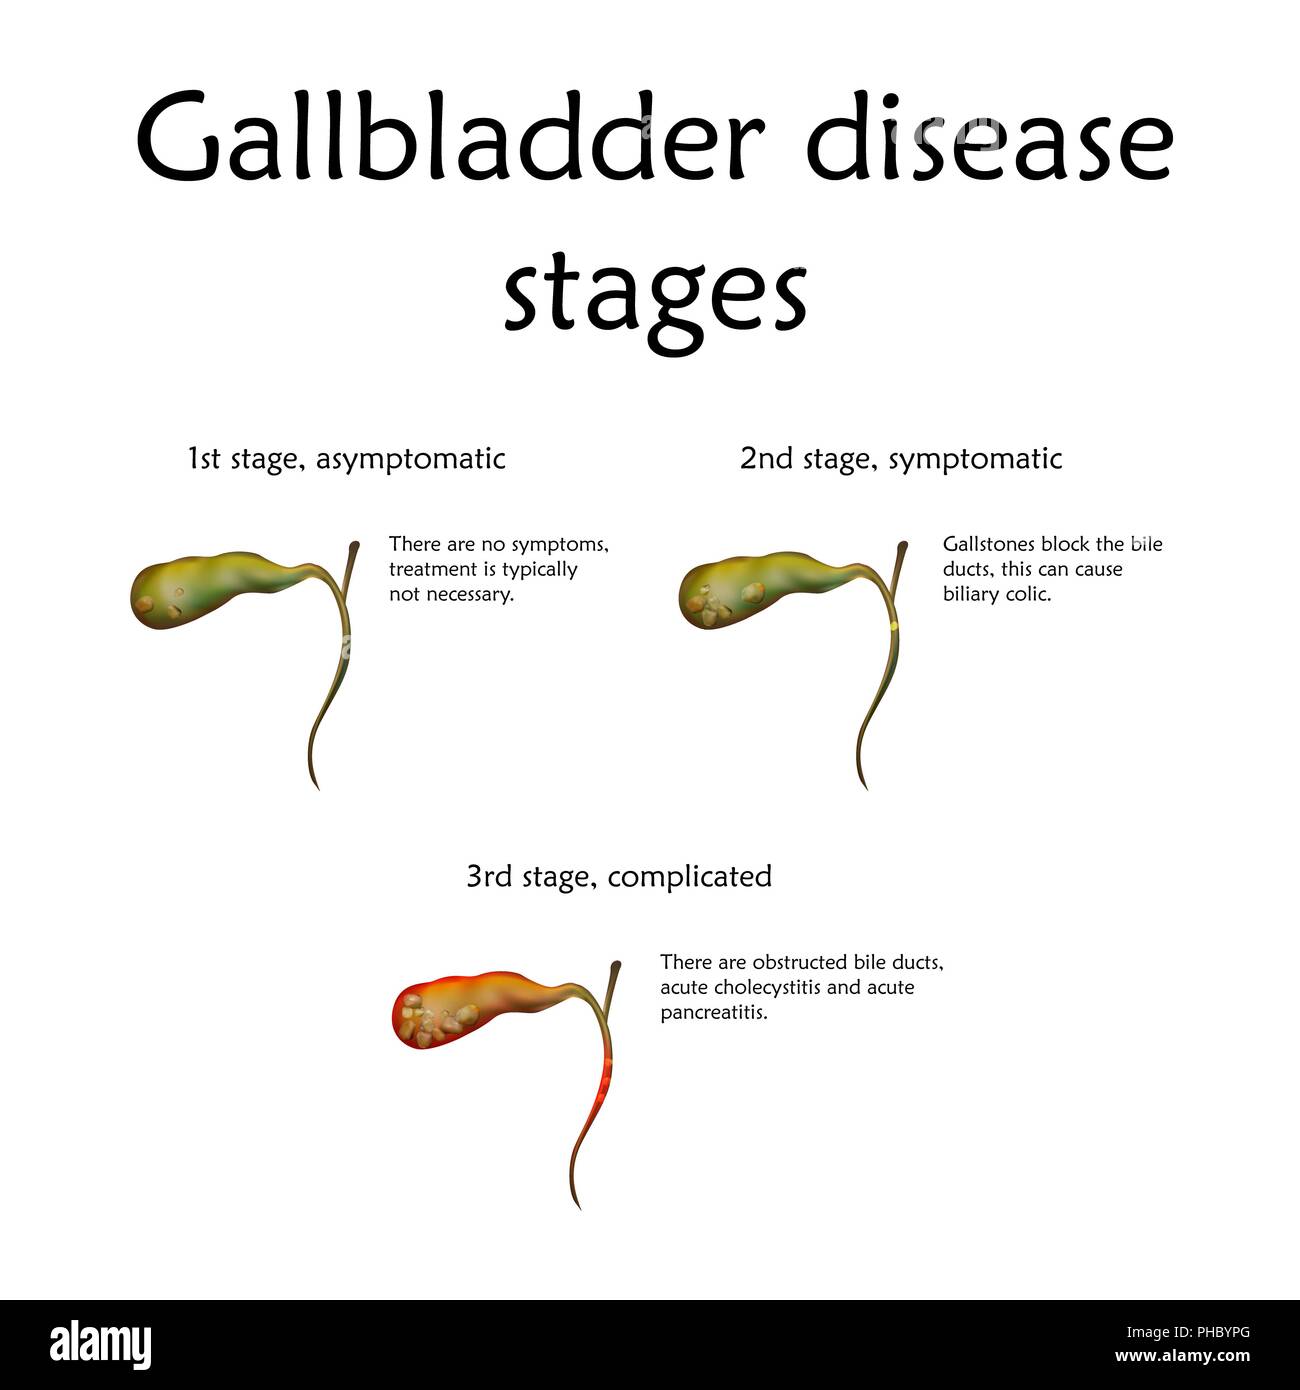 Gallbladder disease stages, illustration. The stages include inflammation and gallstone formation. Stock Photo